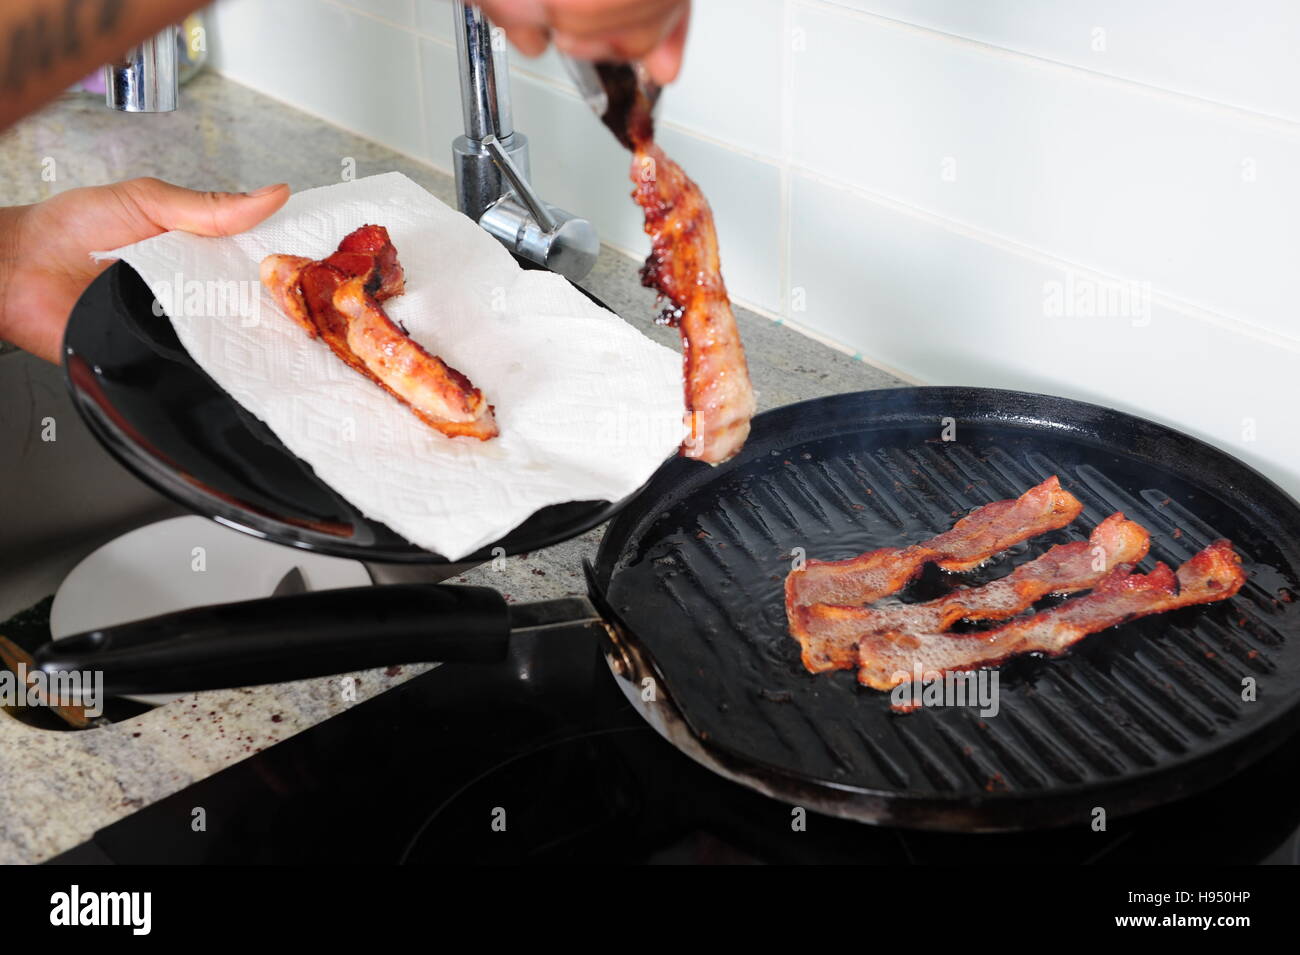 African American man cooking bacon on stove with a grill pan Stock Photo